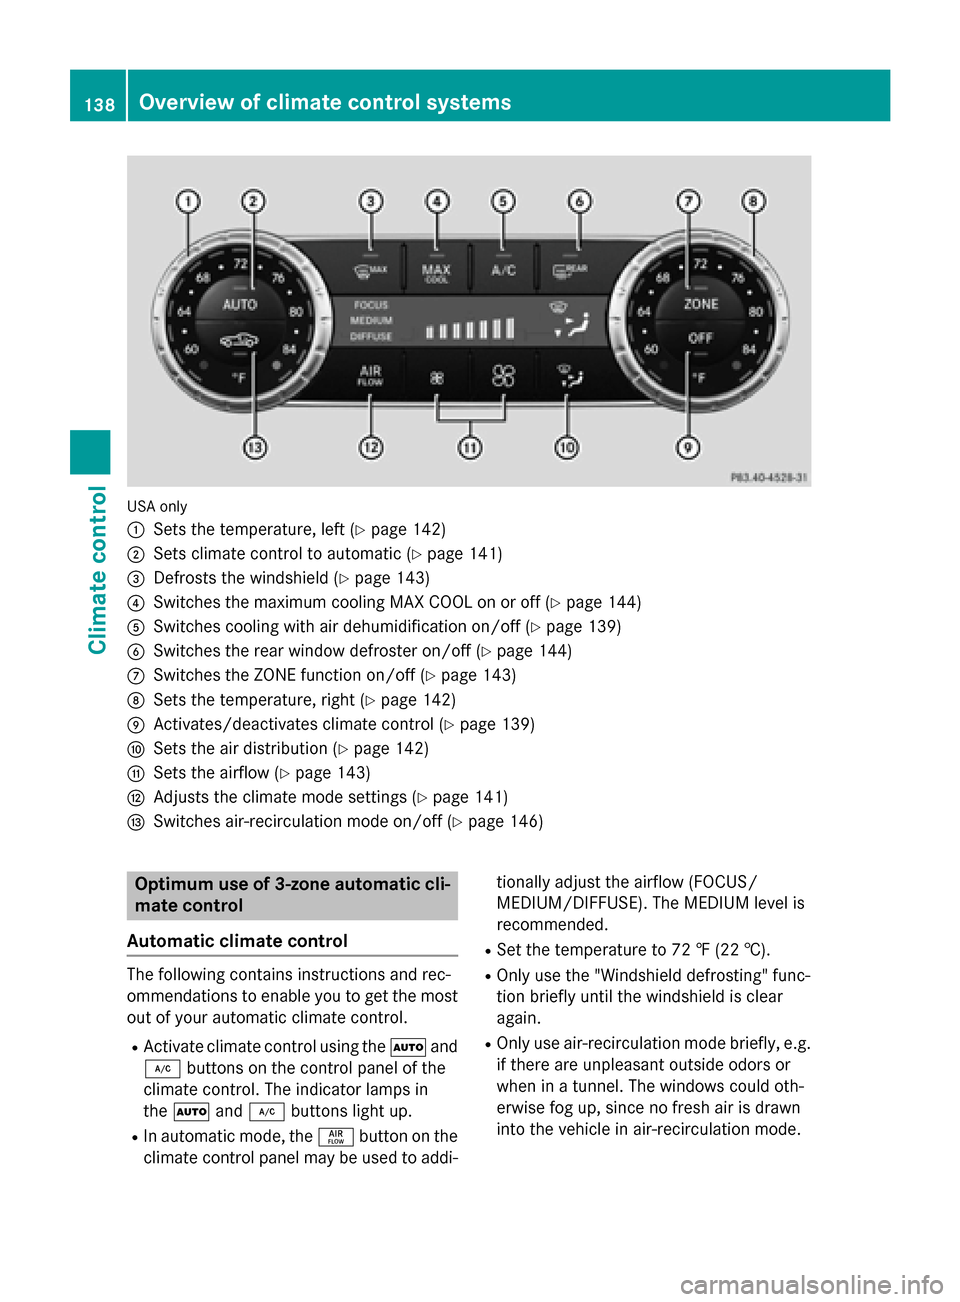 MERCEDES-BENZ SL-Class 2016 R231 Owners Manual USA only
:
Sets the temperature, left (Ypage 142)
;Sets climate control to automatic (Ypage 141)
=Defrosts the windshield (Ypage 143)
?Switches the maximum cooling MAX COOL on or off (Ypage 144)
ASwit